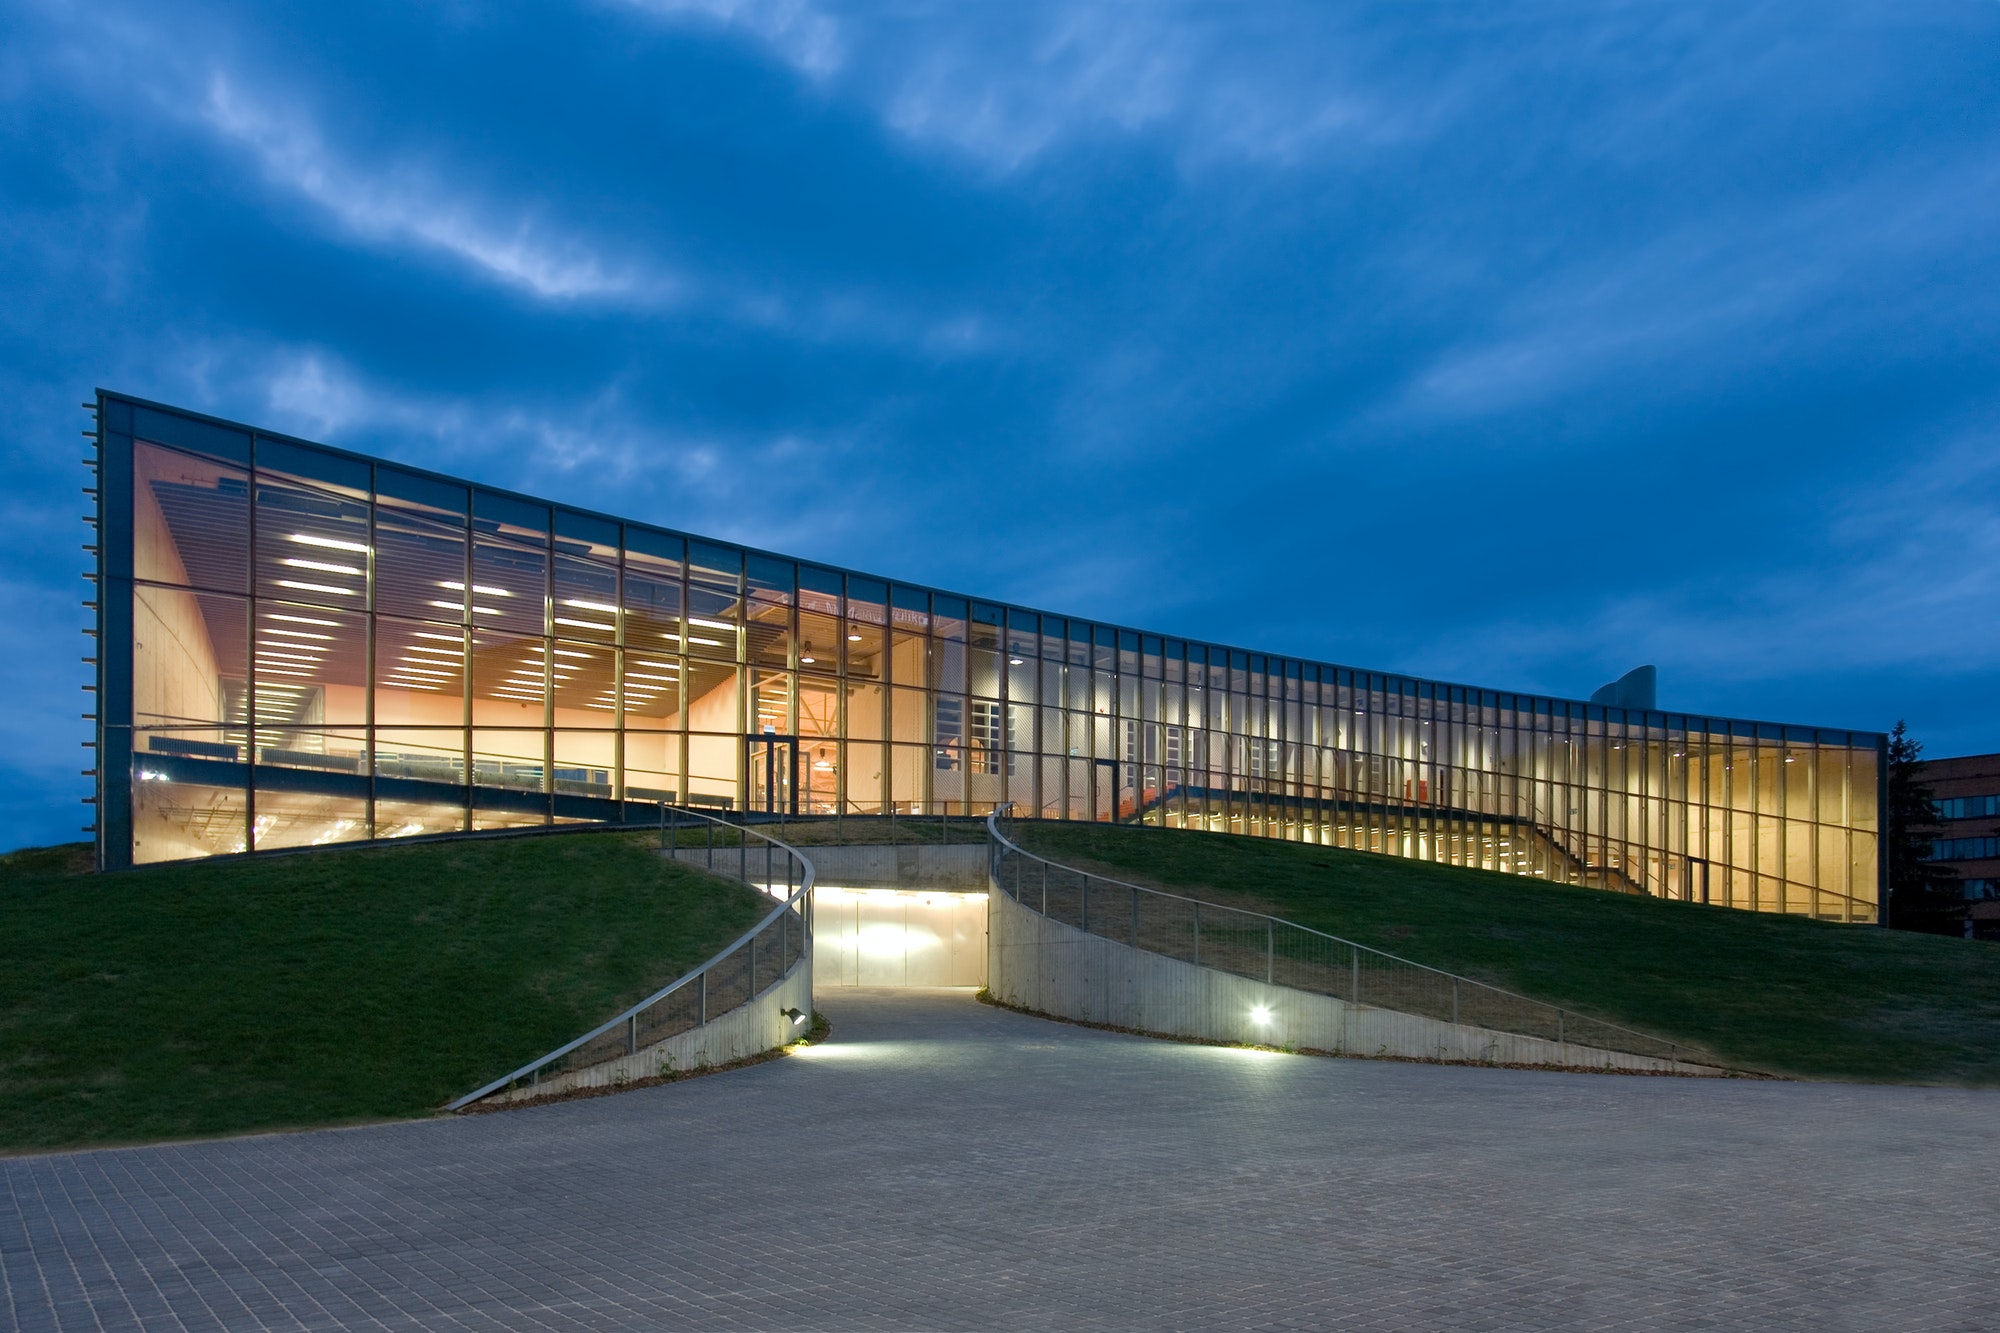 Modern university buildings, glass facade lit up at night, on a curved ground surface